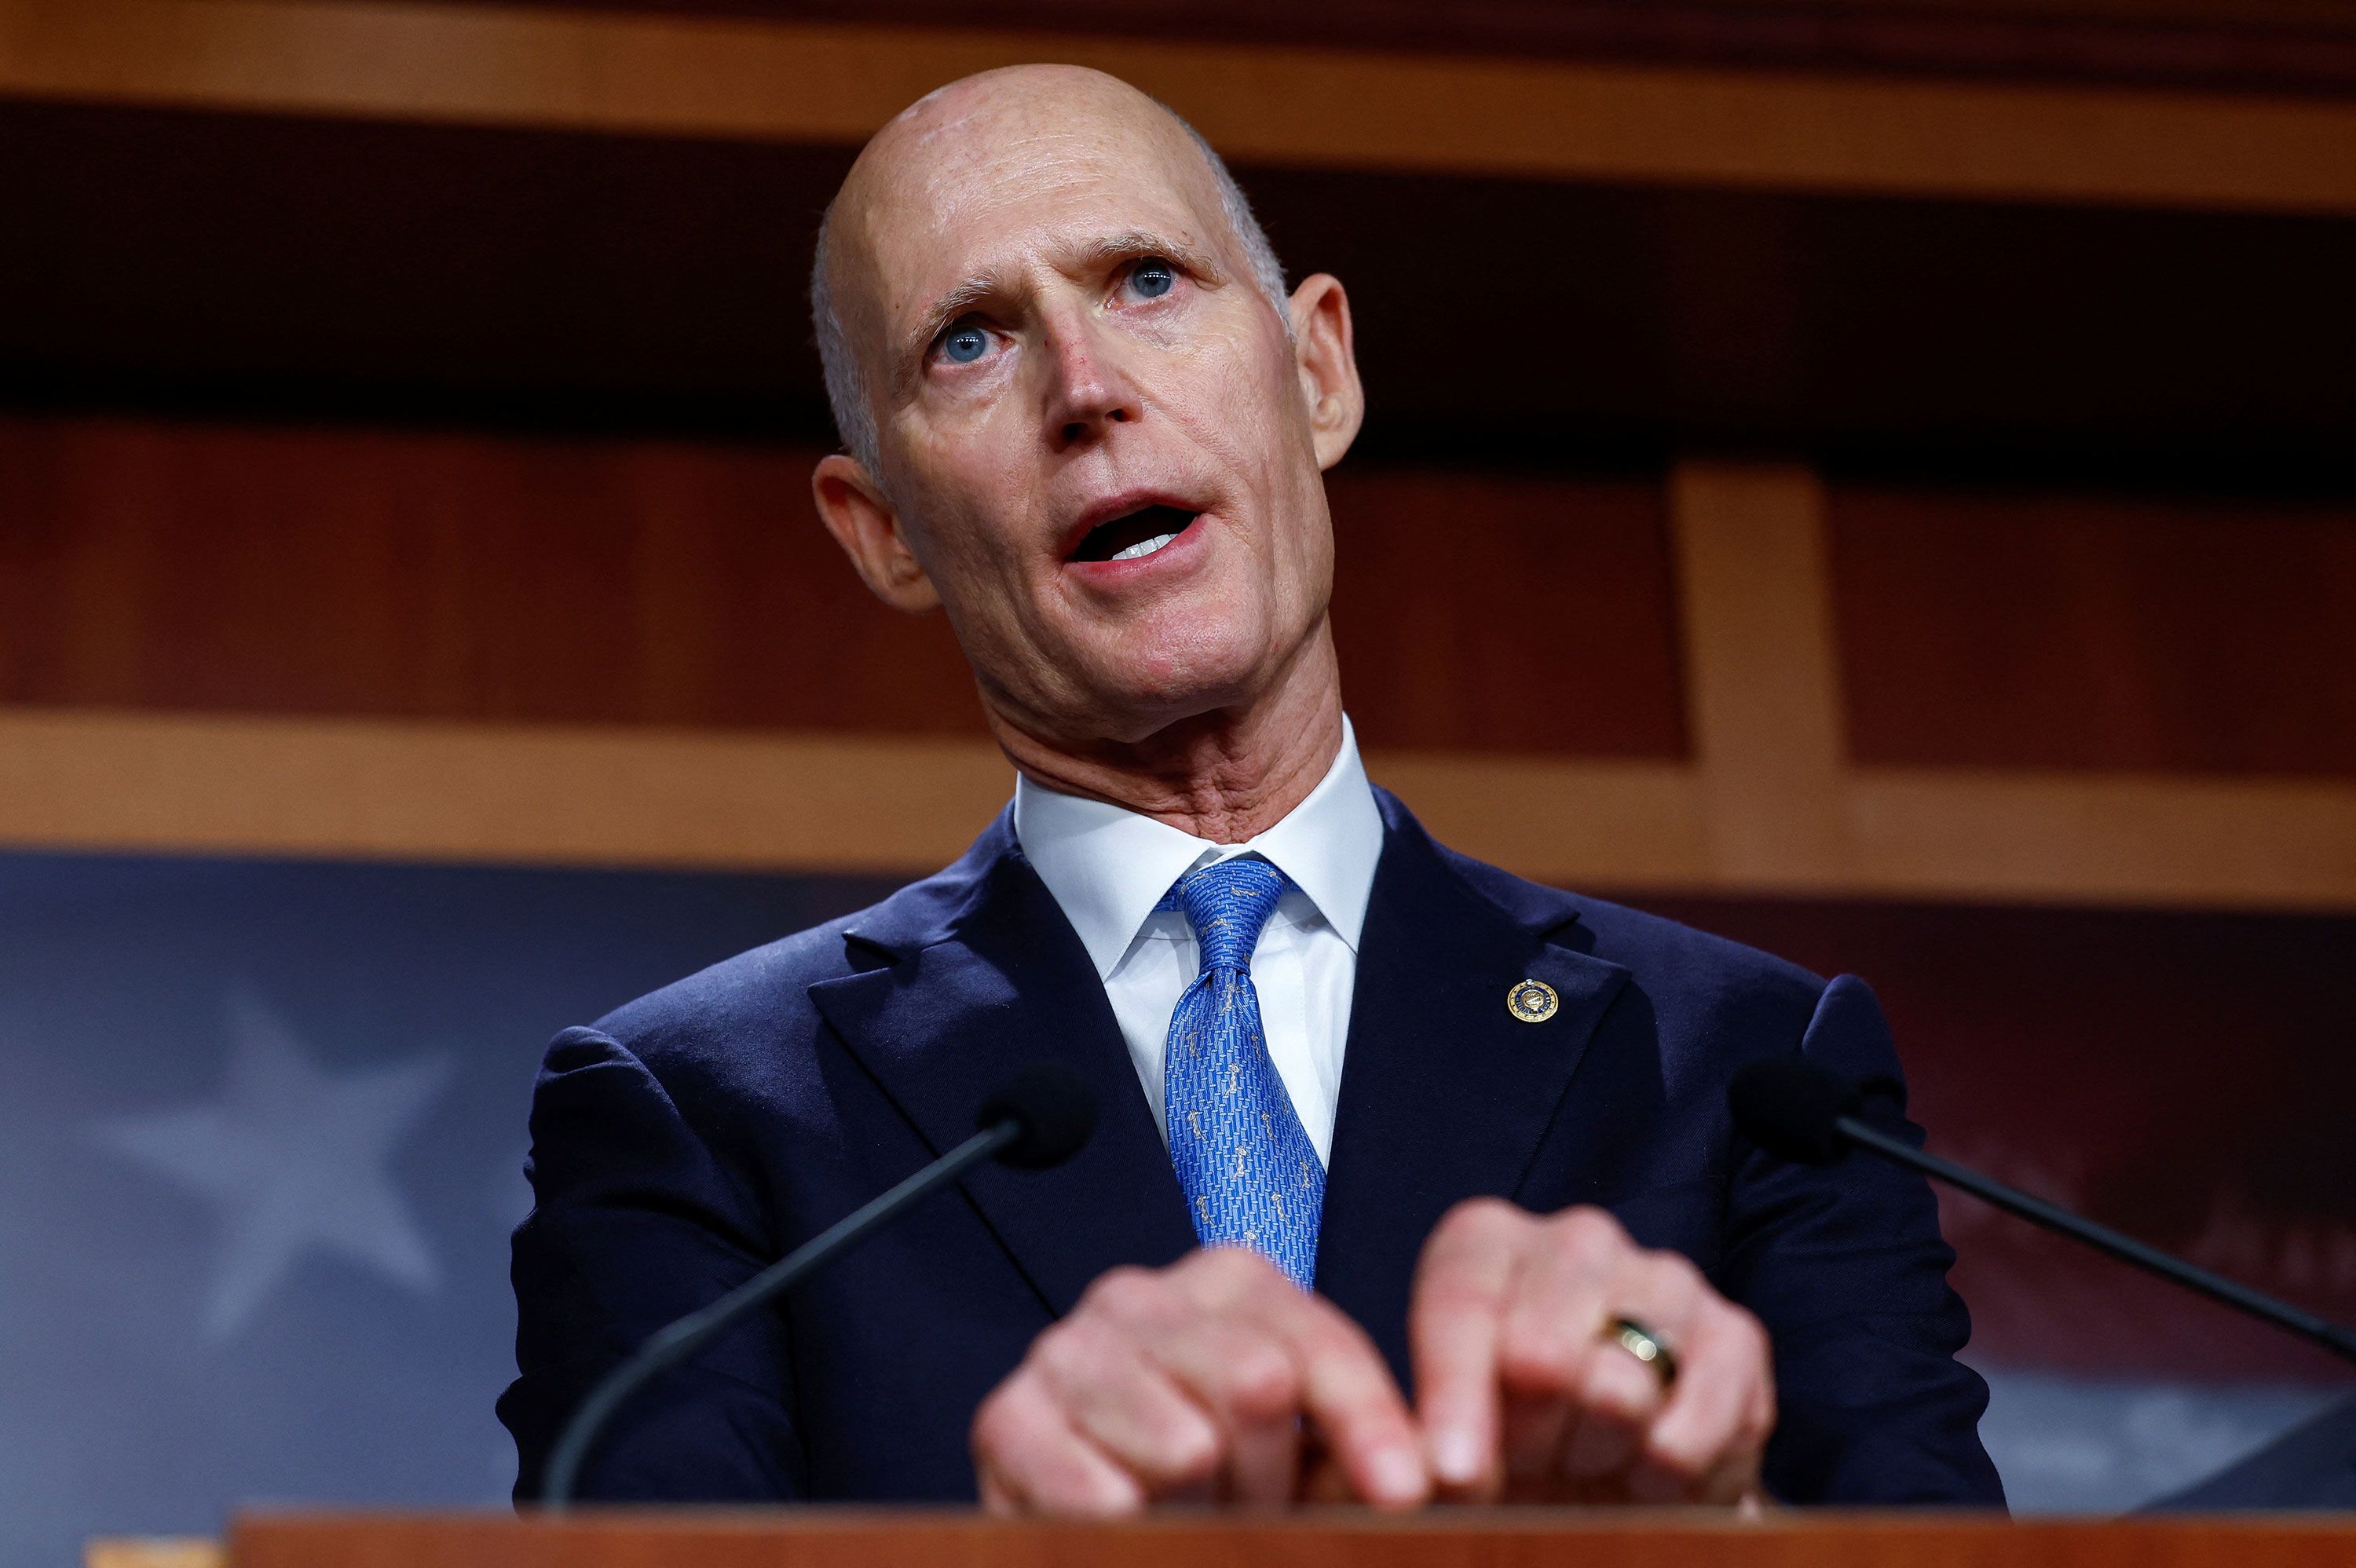 U.S. Senator Rick Scott (R-FL) calls for the rescinding of the COVID-19 mandate for U.S. military during a news conference about the National Defense Authorization Act, on Capitol Hill in Washington, U.S., December 7, 2022. REUTERS/Evelyn Hockstein